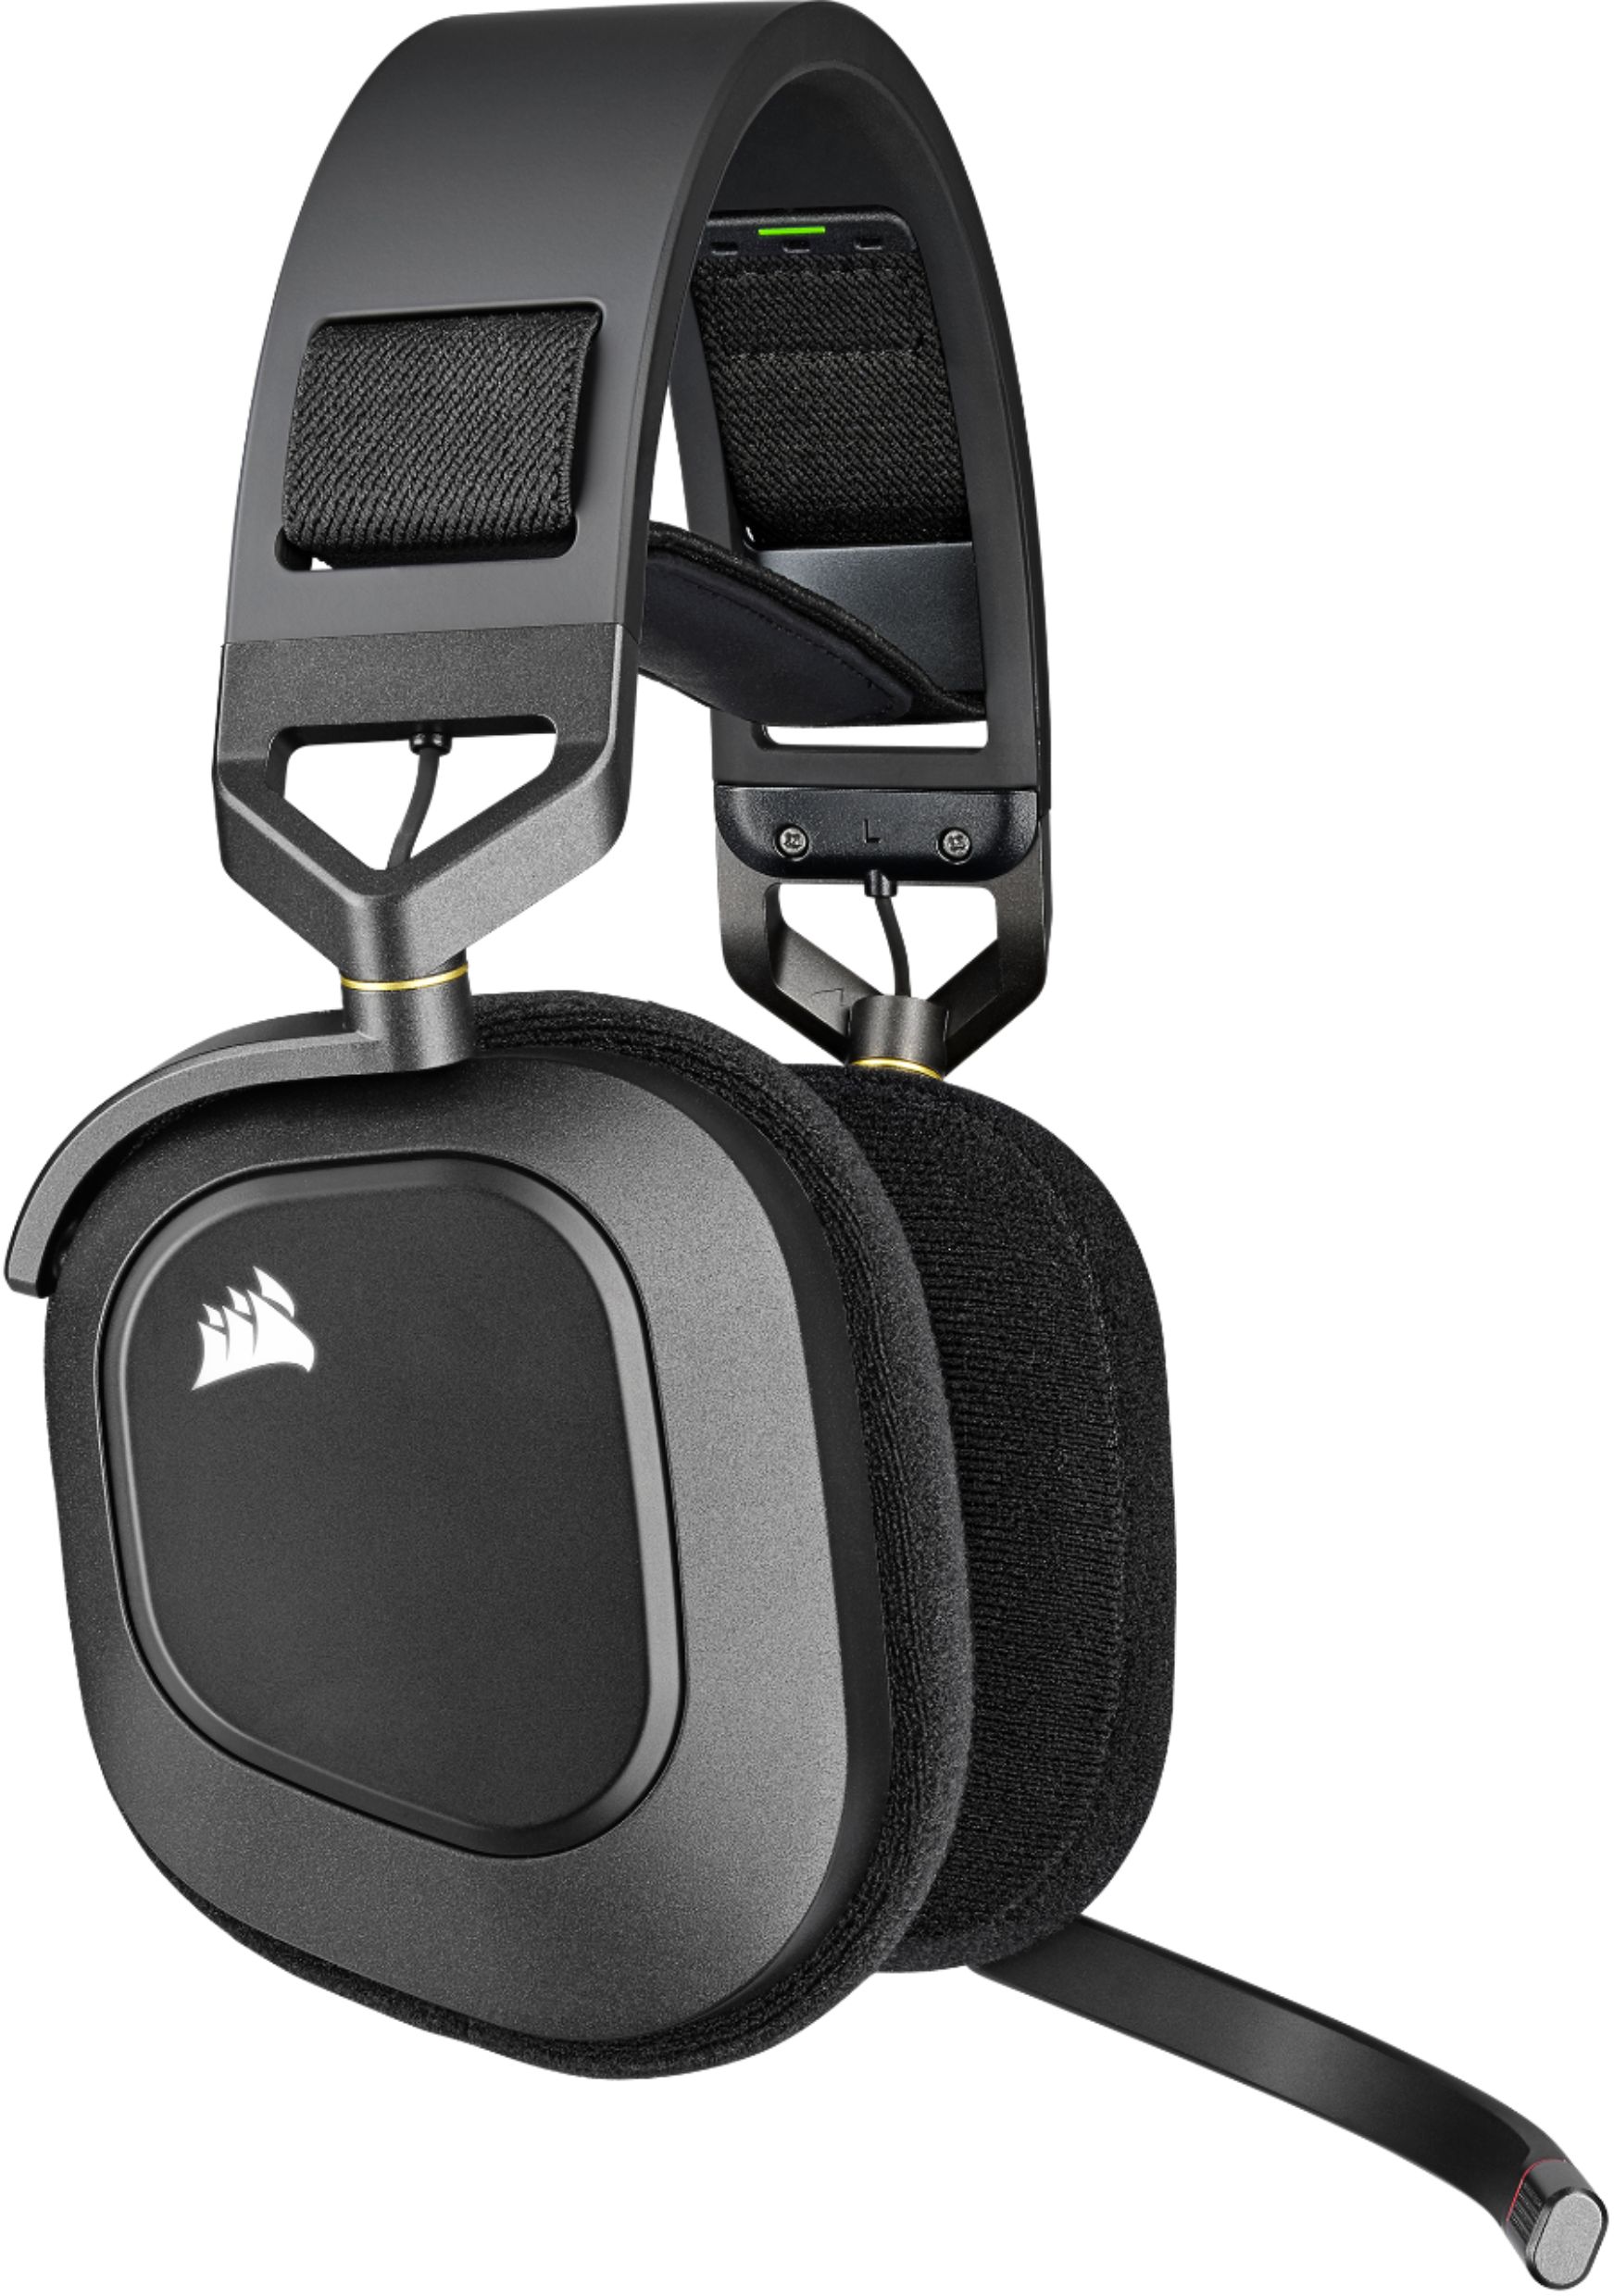 CORSAIR HS80 RGB WIRELESS Dolby Atmos Gaming Headset for PC, Mac